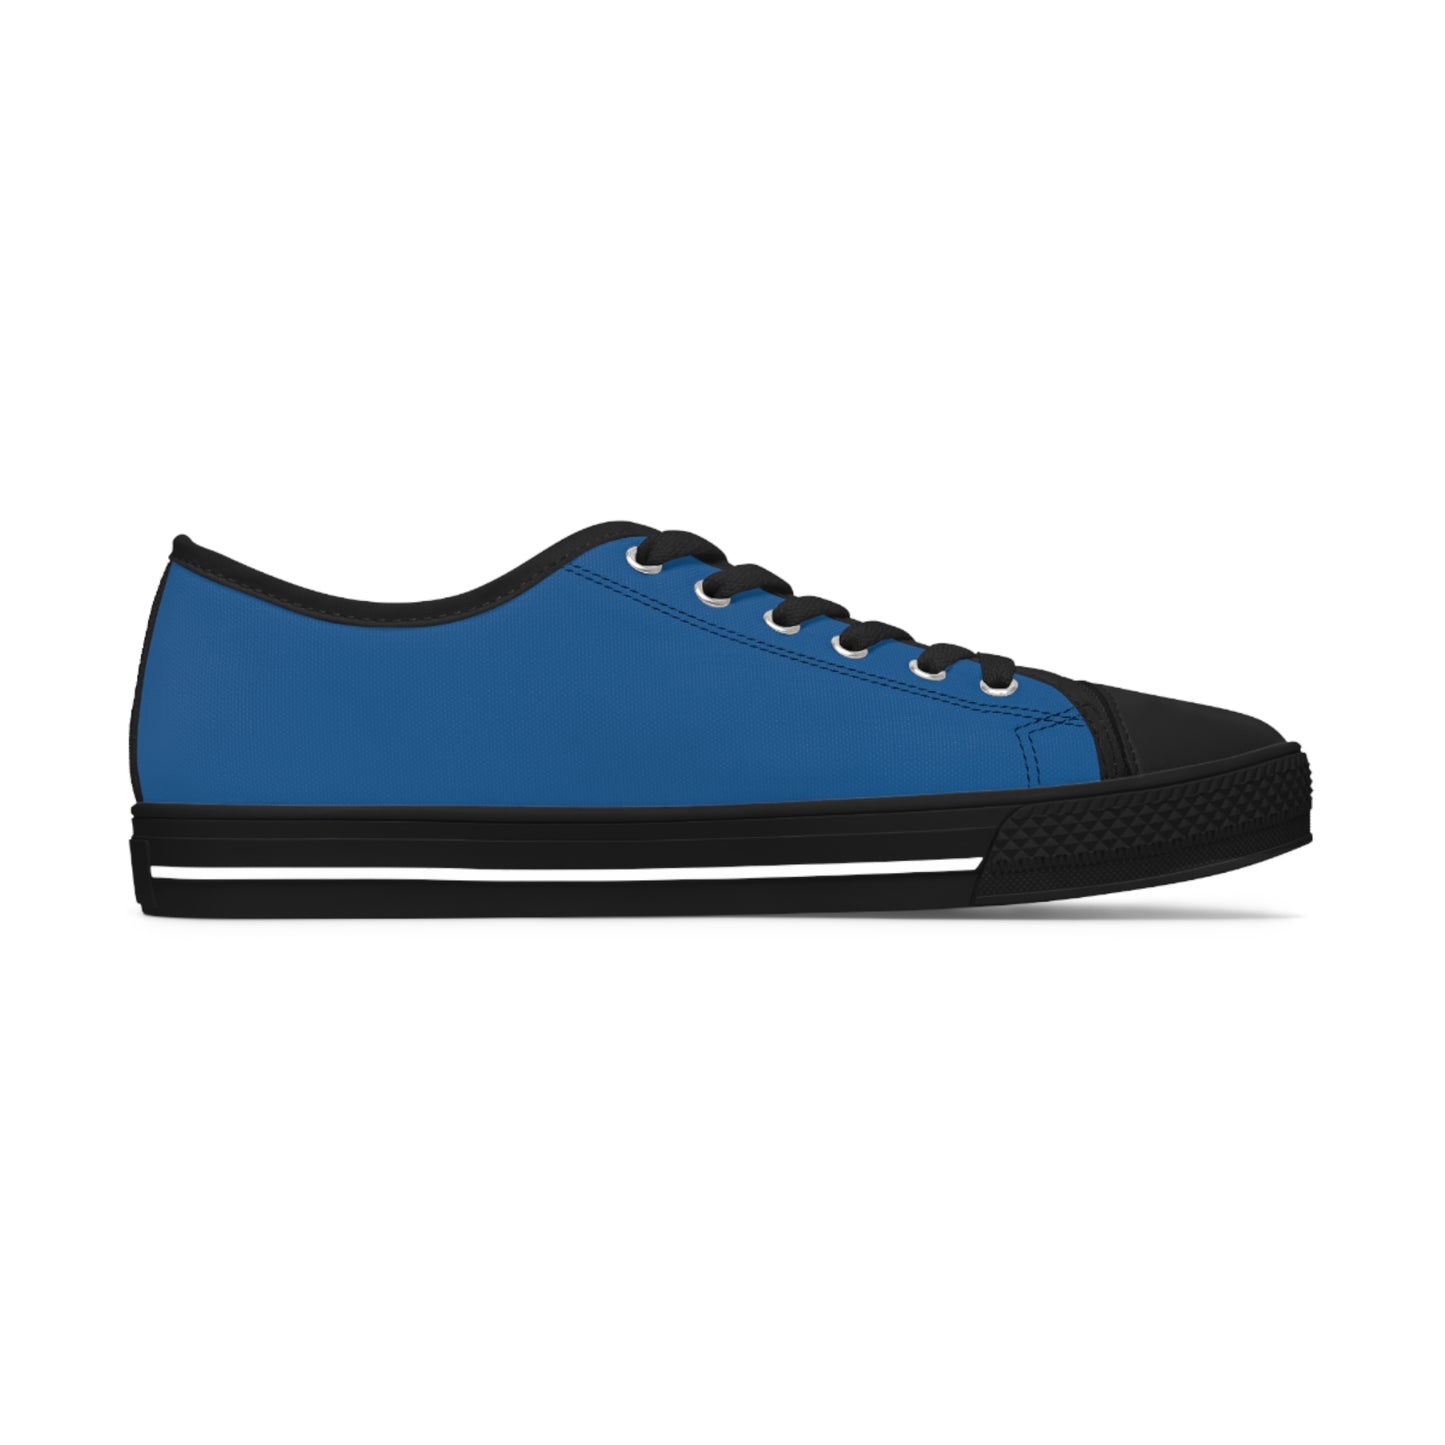 Women's Canvas Low Top Solid Color Sneakers - Rich Blue US 12 White sole